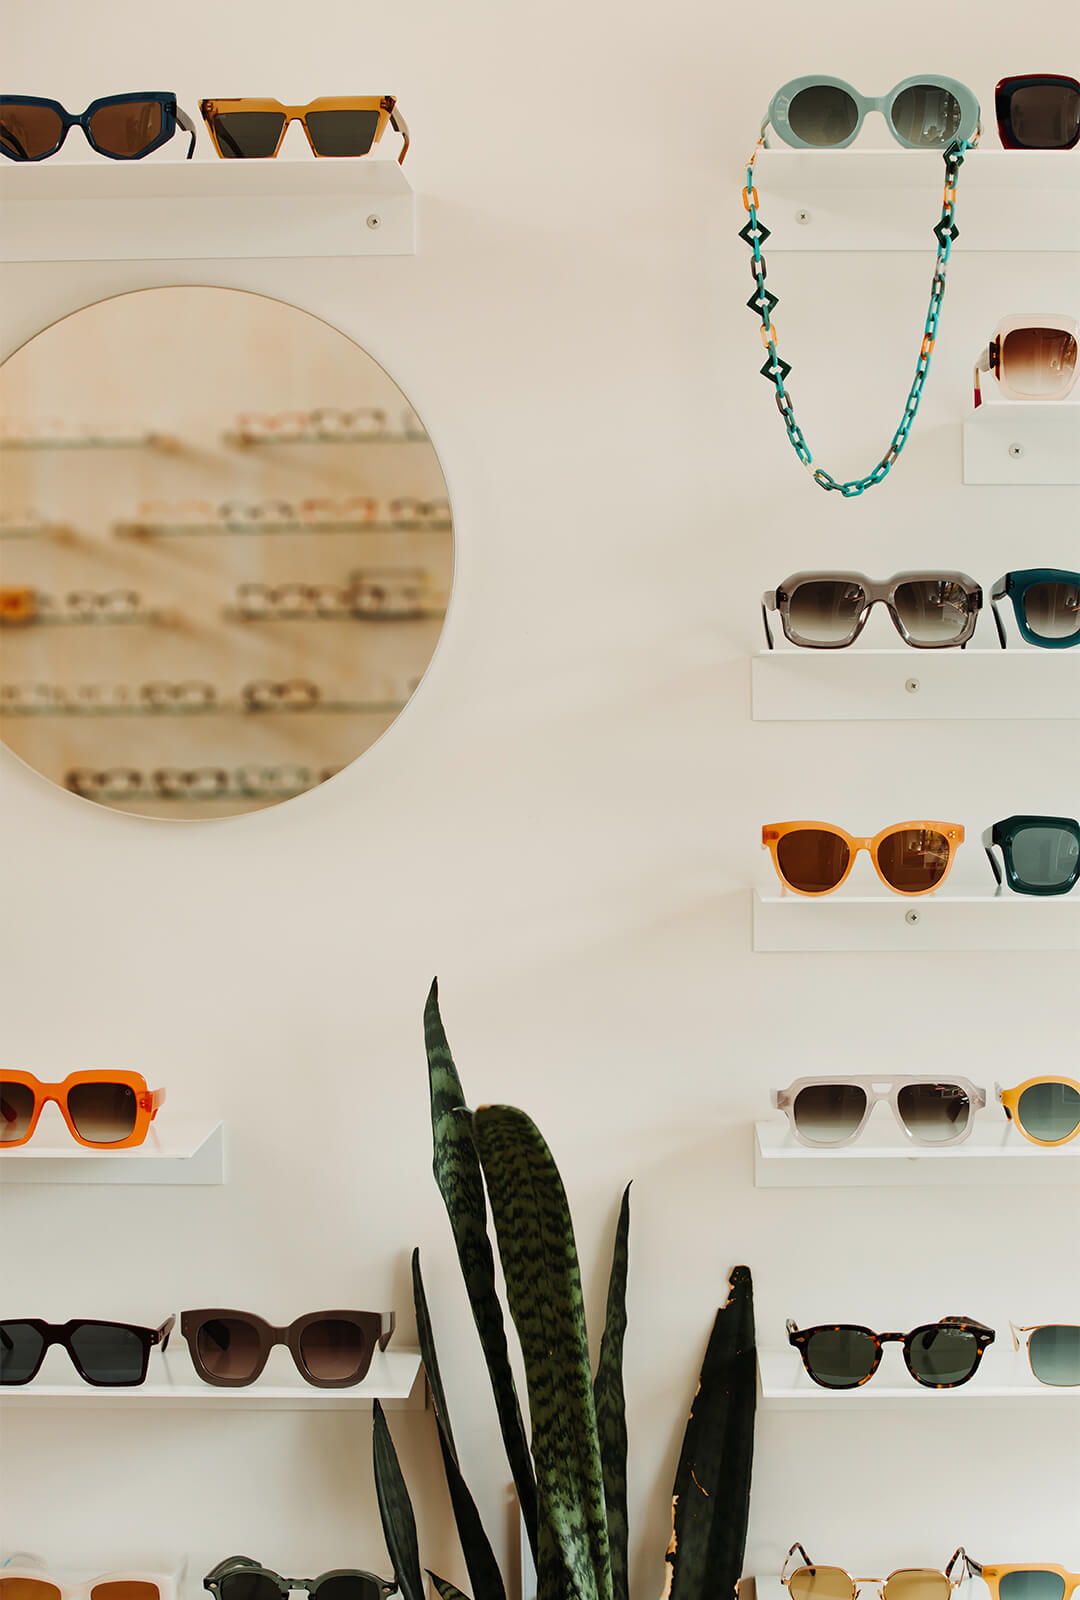 Rows of designer glasses lining the walls of Peep Optical, an optometrist in Yarraville.